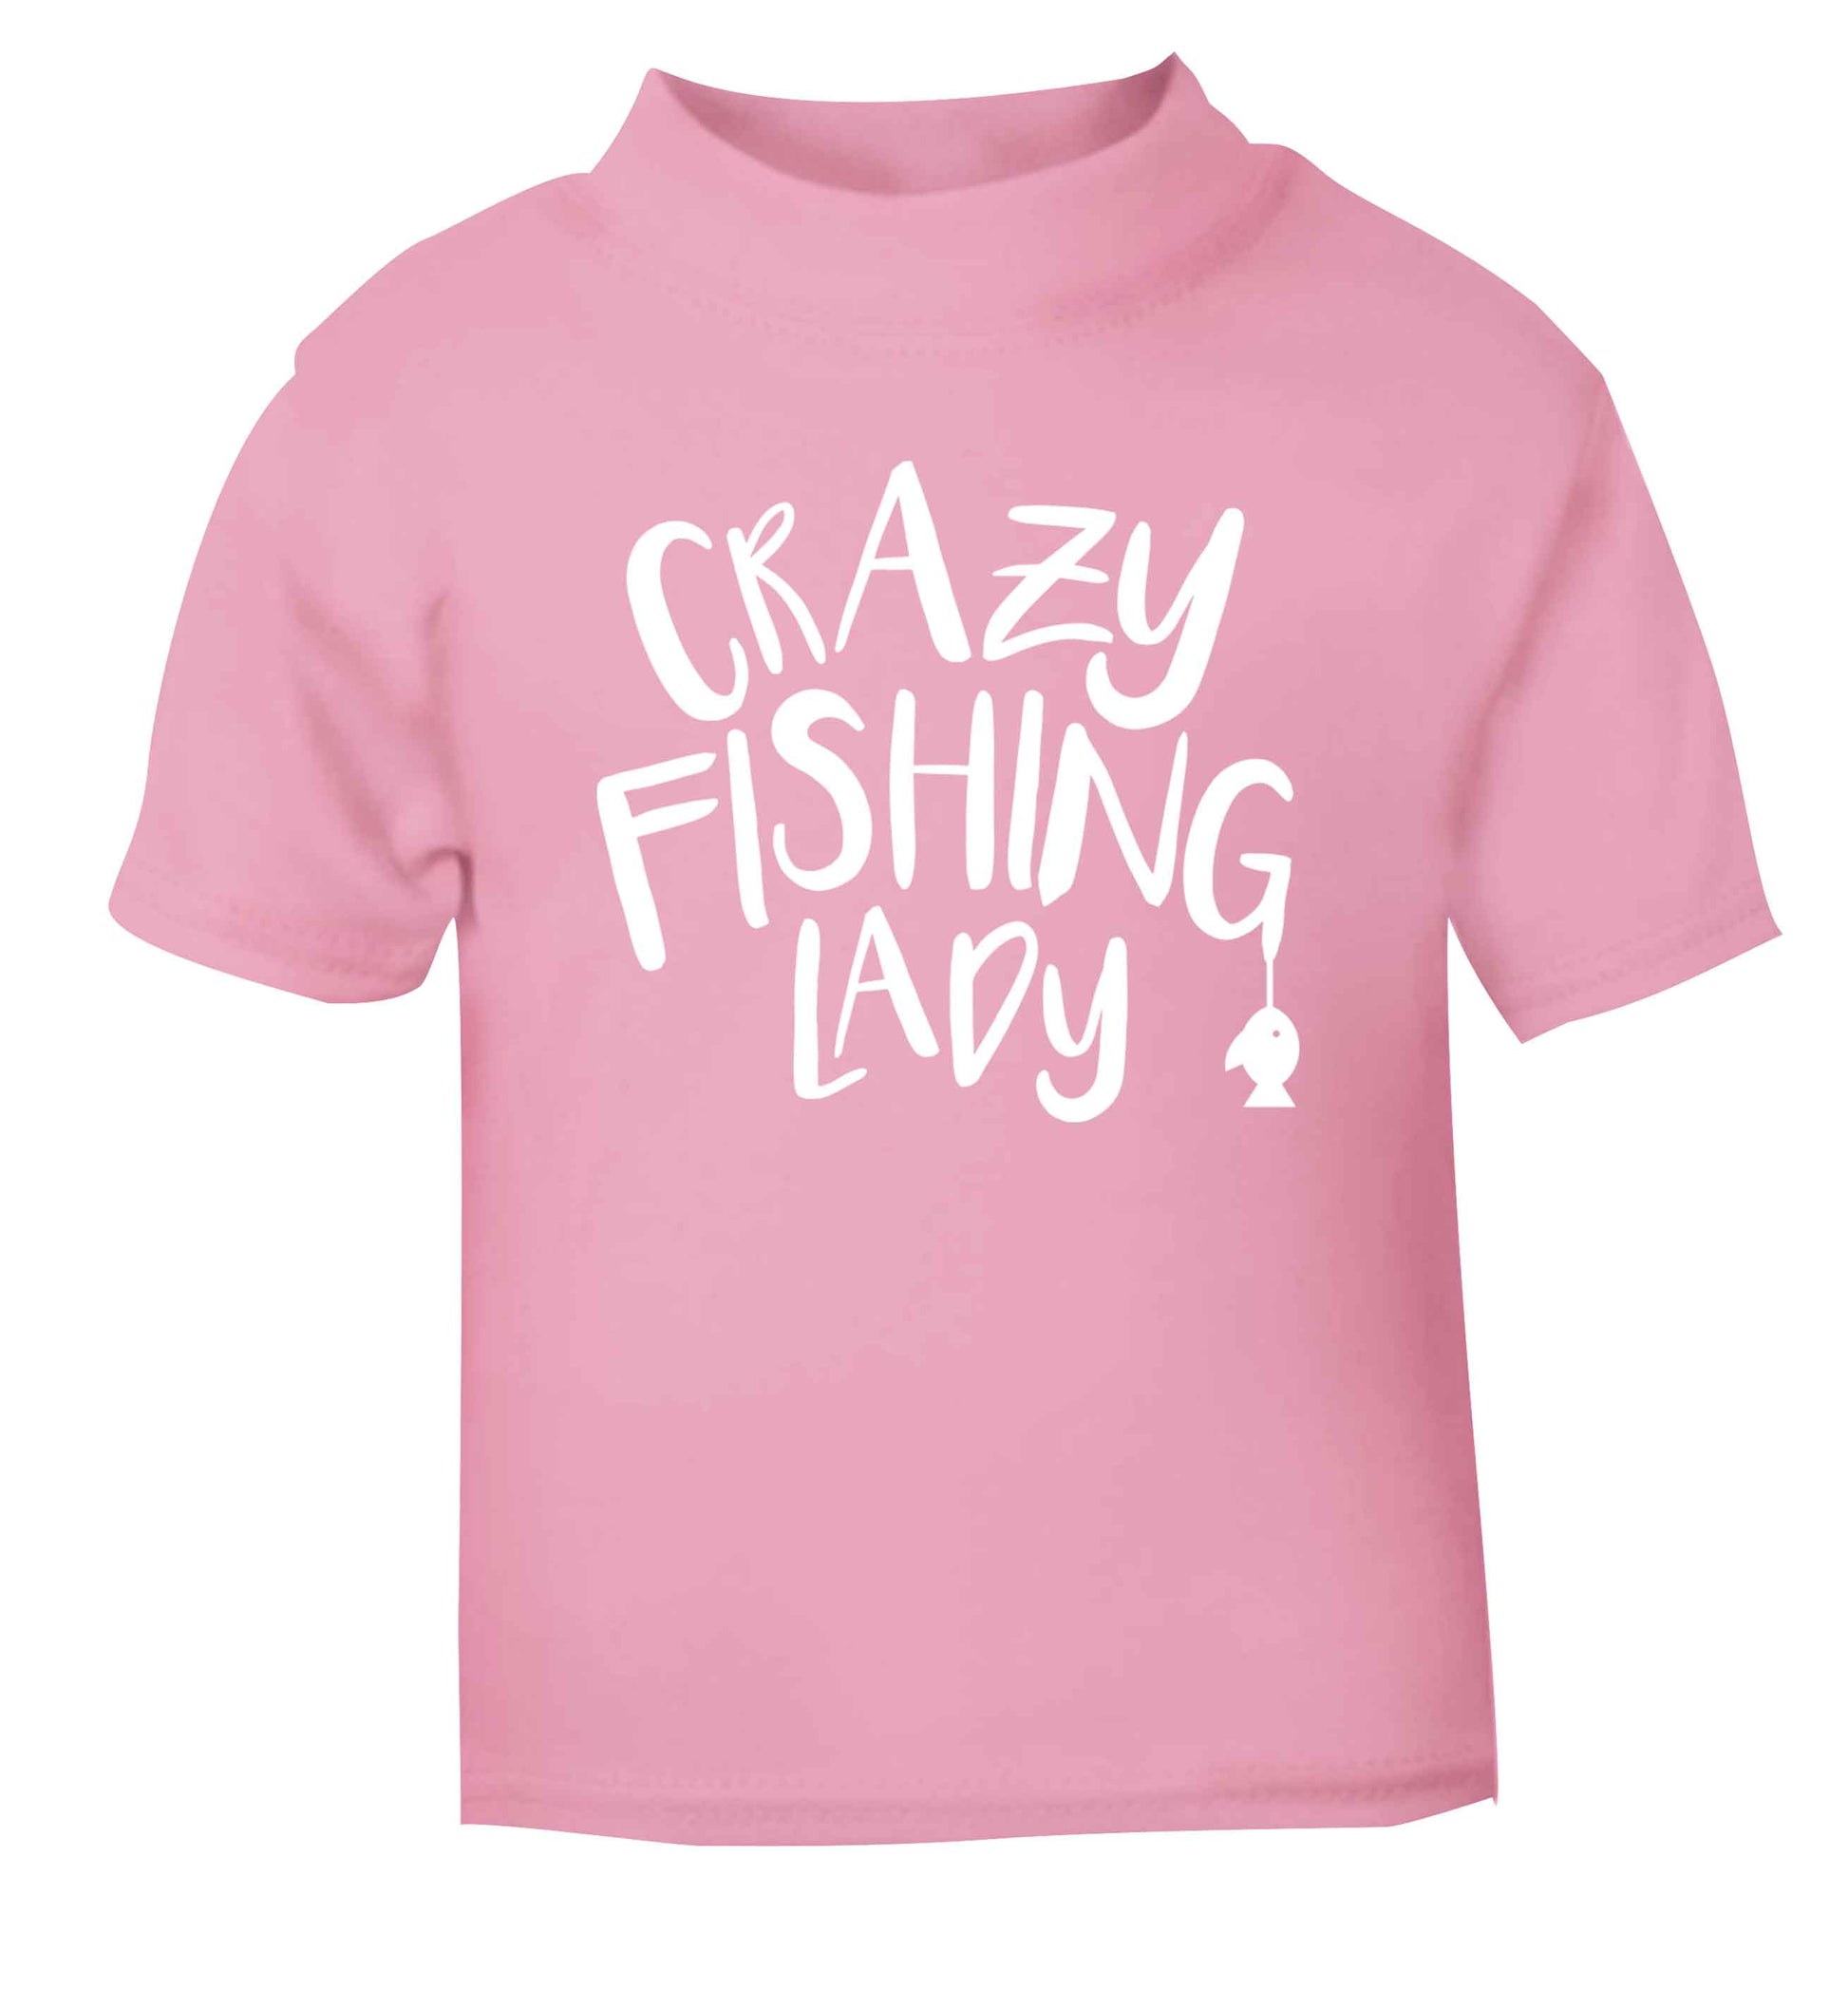 Crazy fishing lady light pink Baby Toddler Tshirt 2 Years